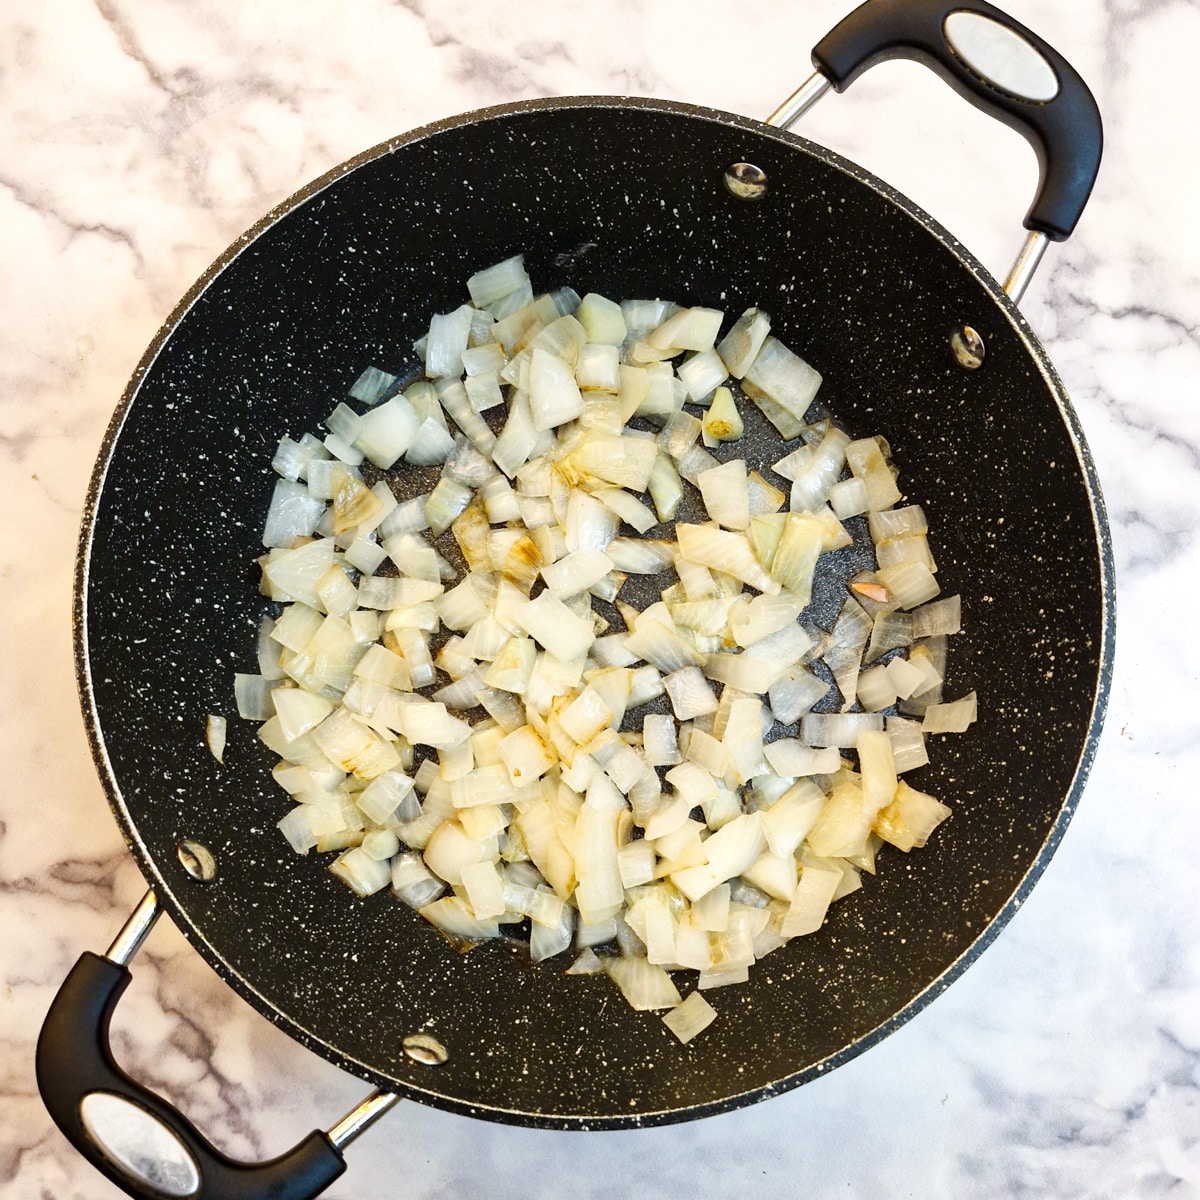 Chopped onions browning in a frying pan.